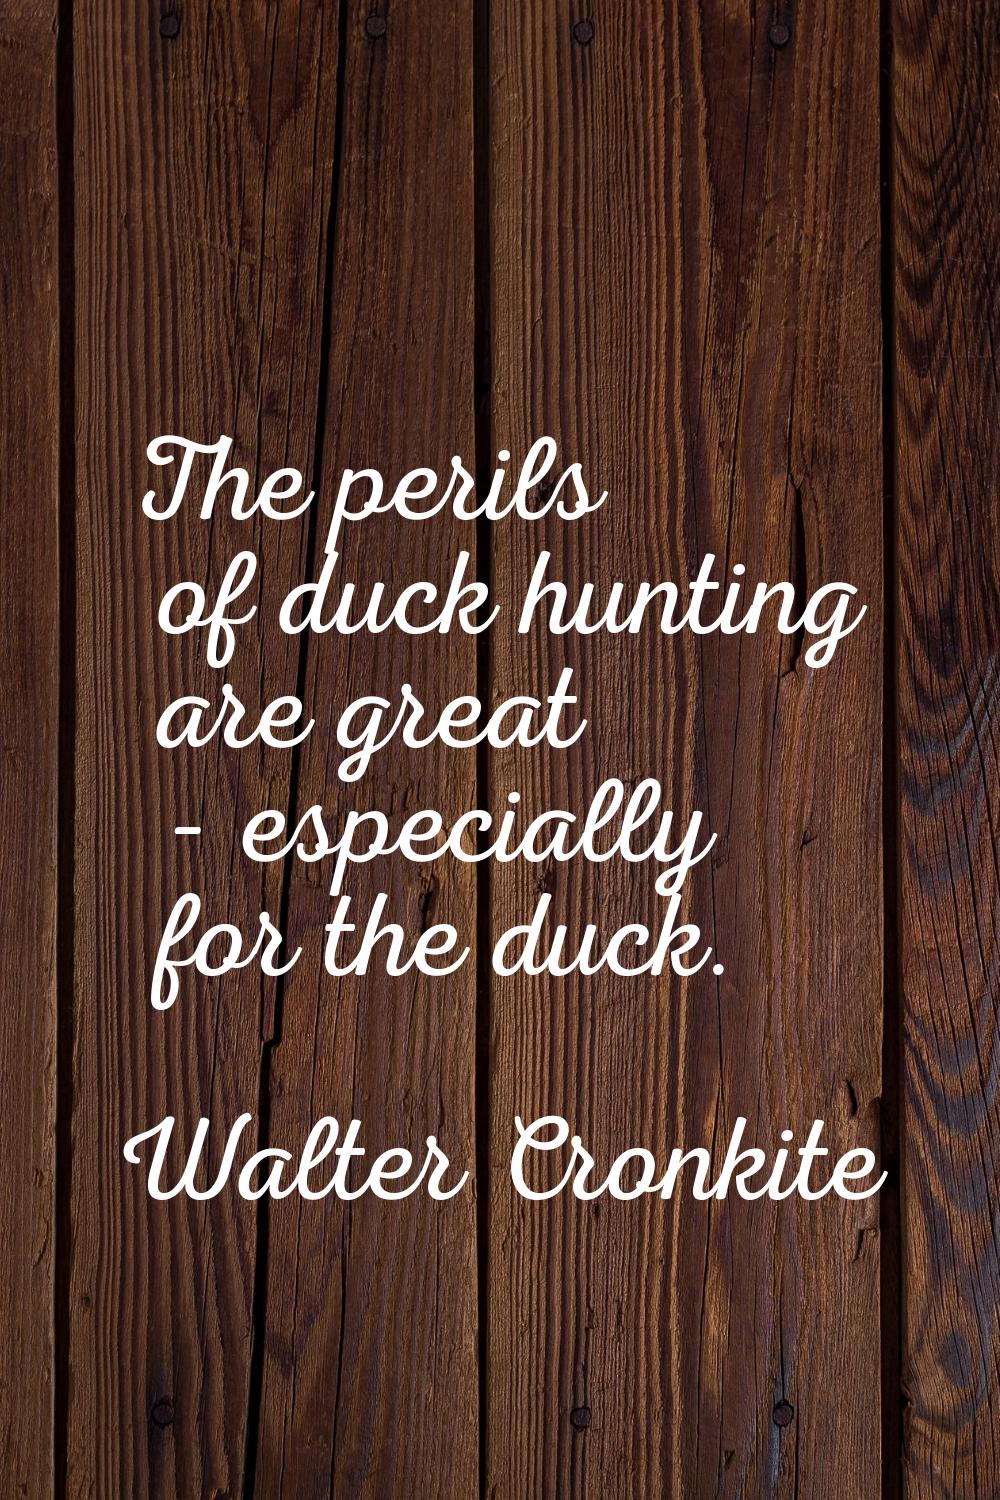 The perils of duck hunting are great - especially for the duck.